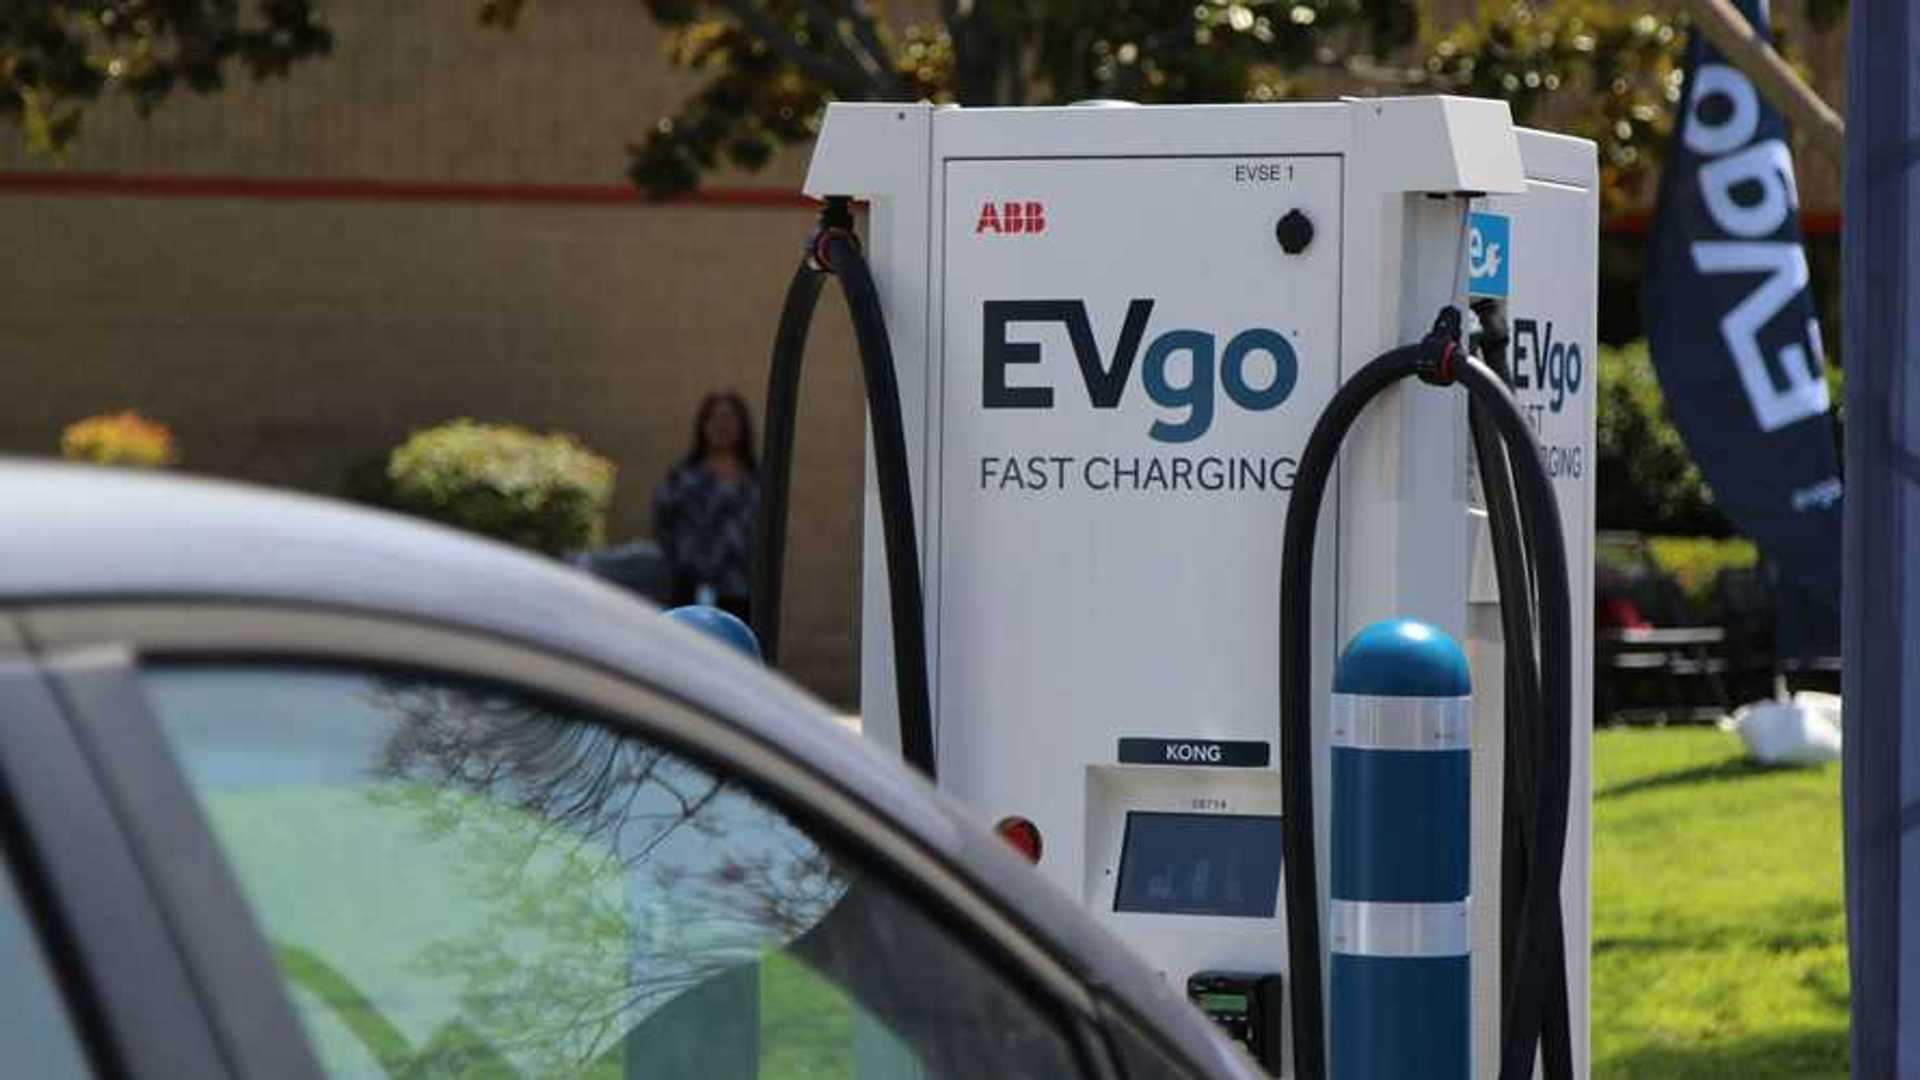 rivian r1t and r1s now compatible with evgo's autocharge+ feature